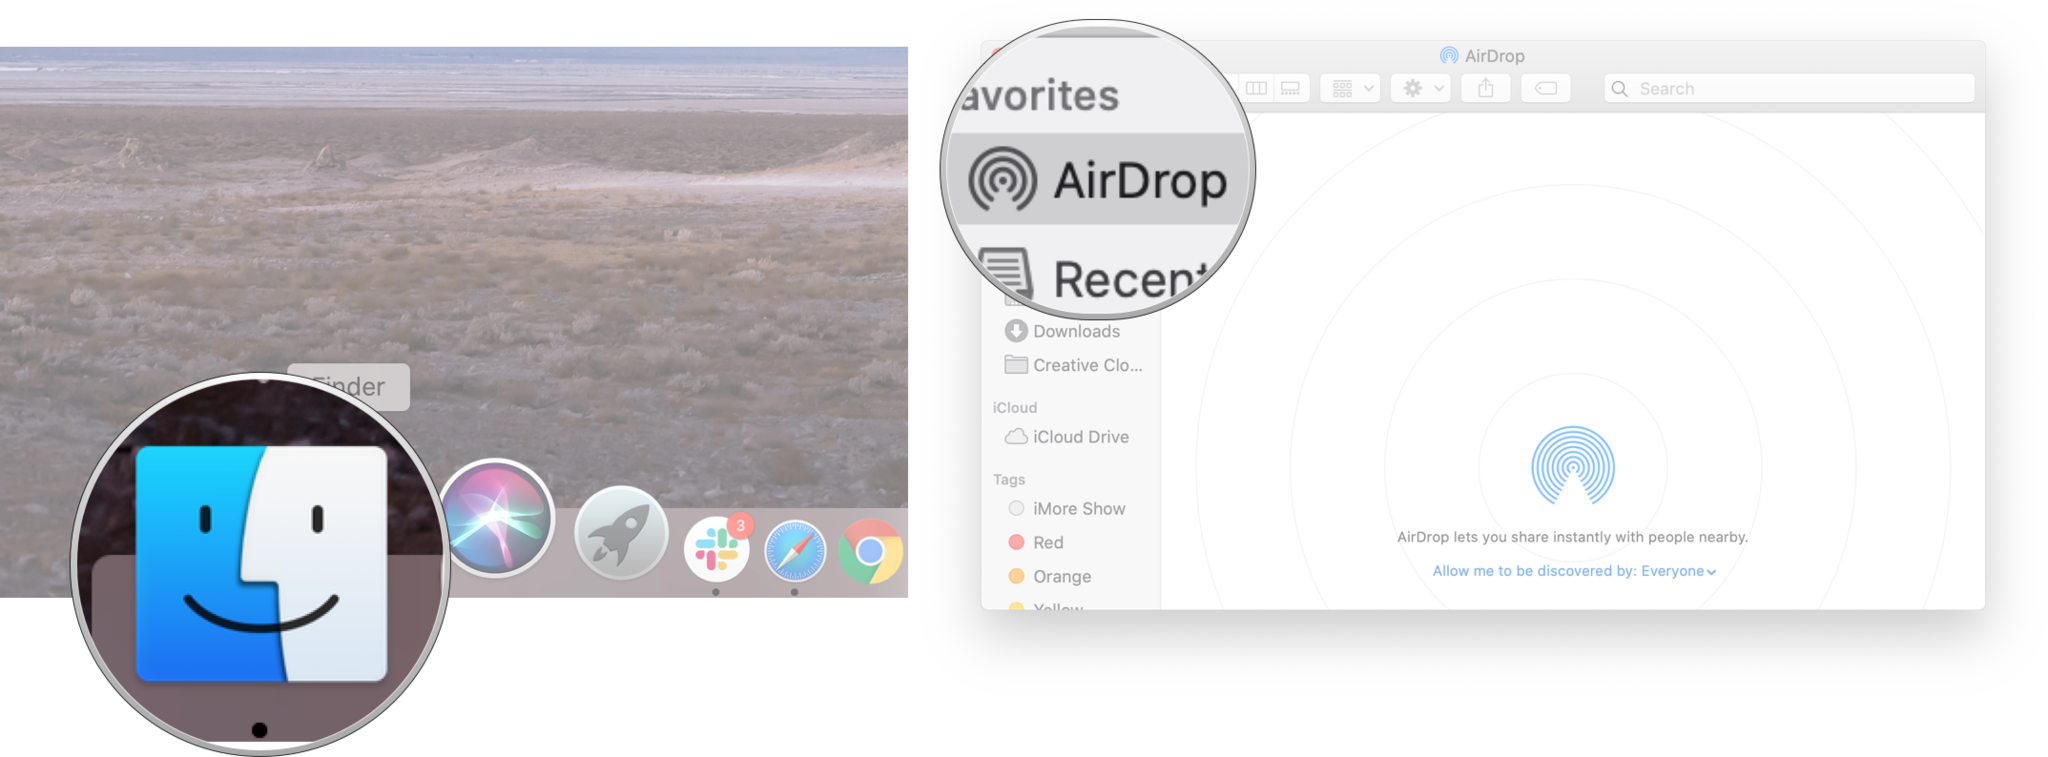 Adjust AirDrop access on Mac: Launch Finder and then click on AirDrop.